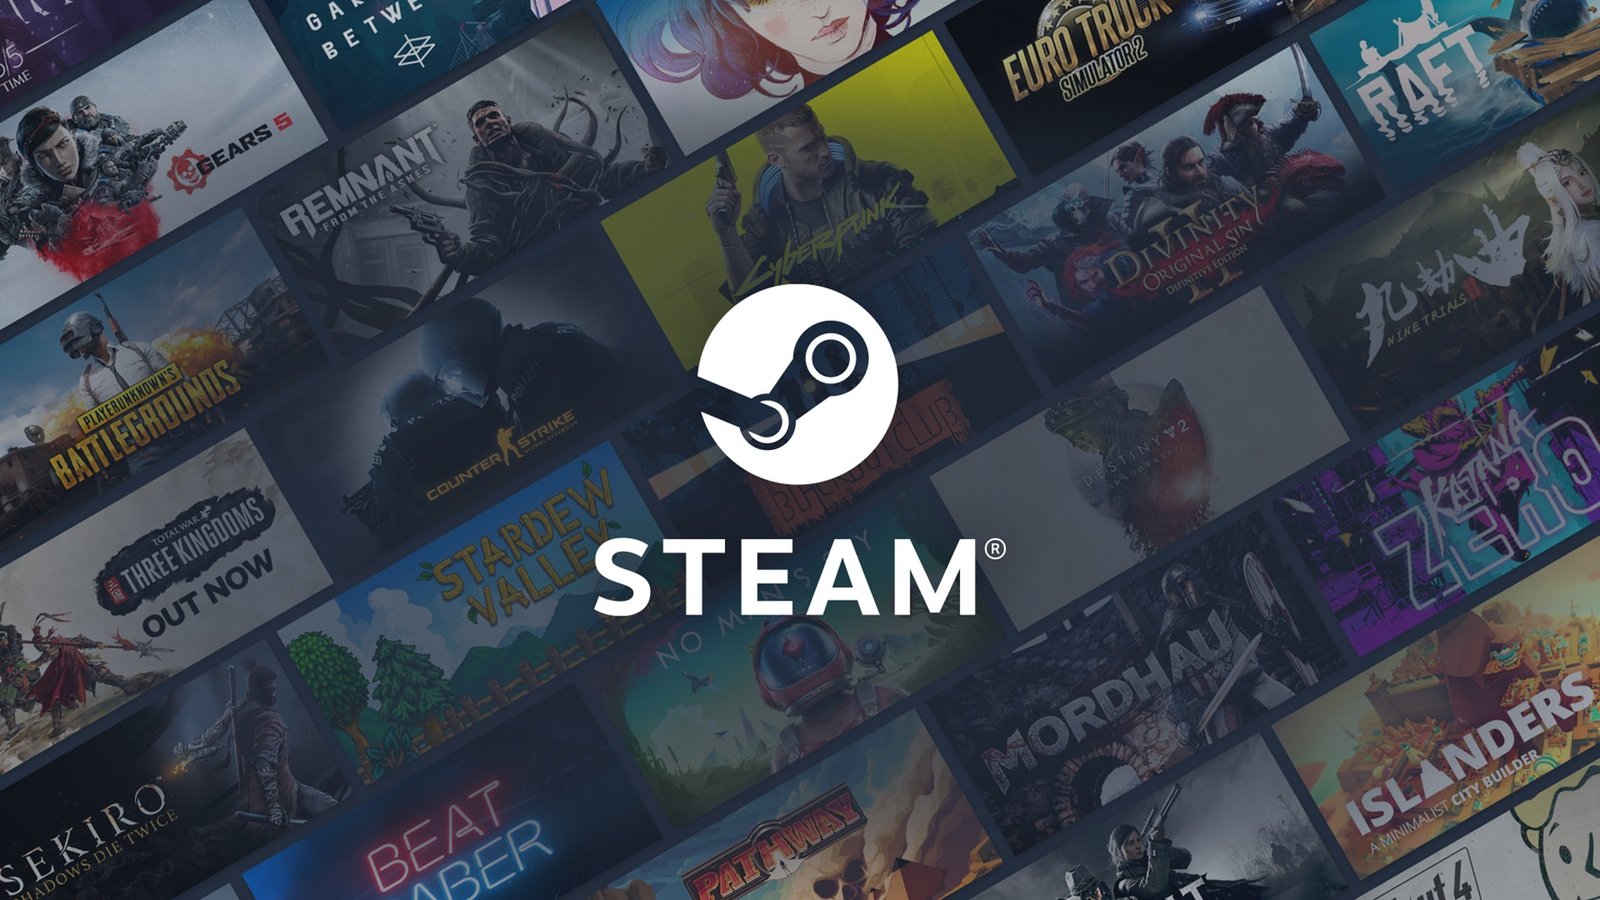 How to Redeem a Steam Code